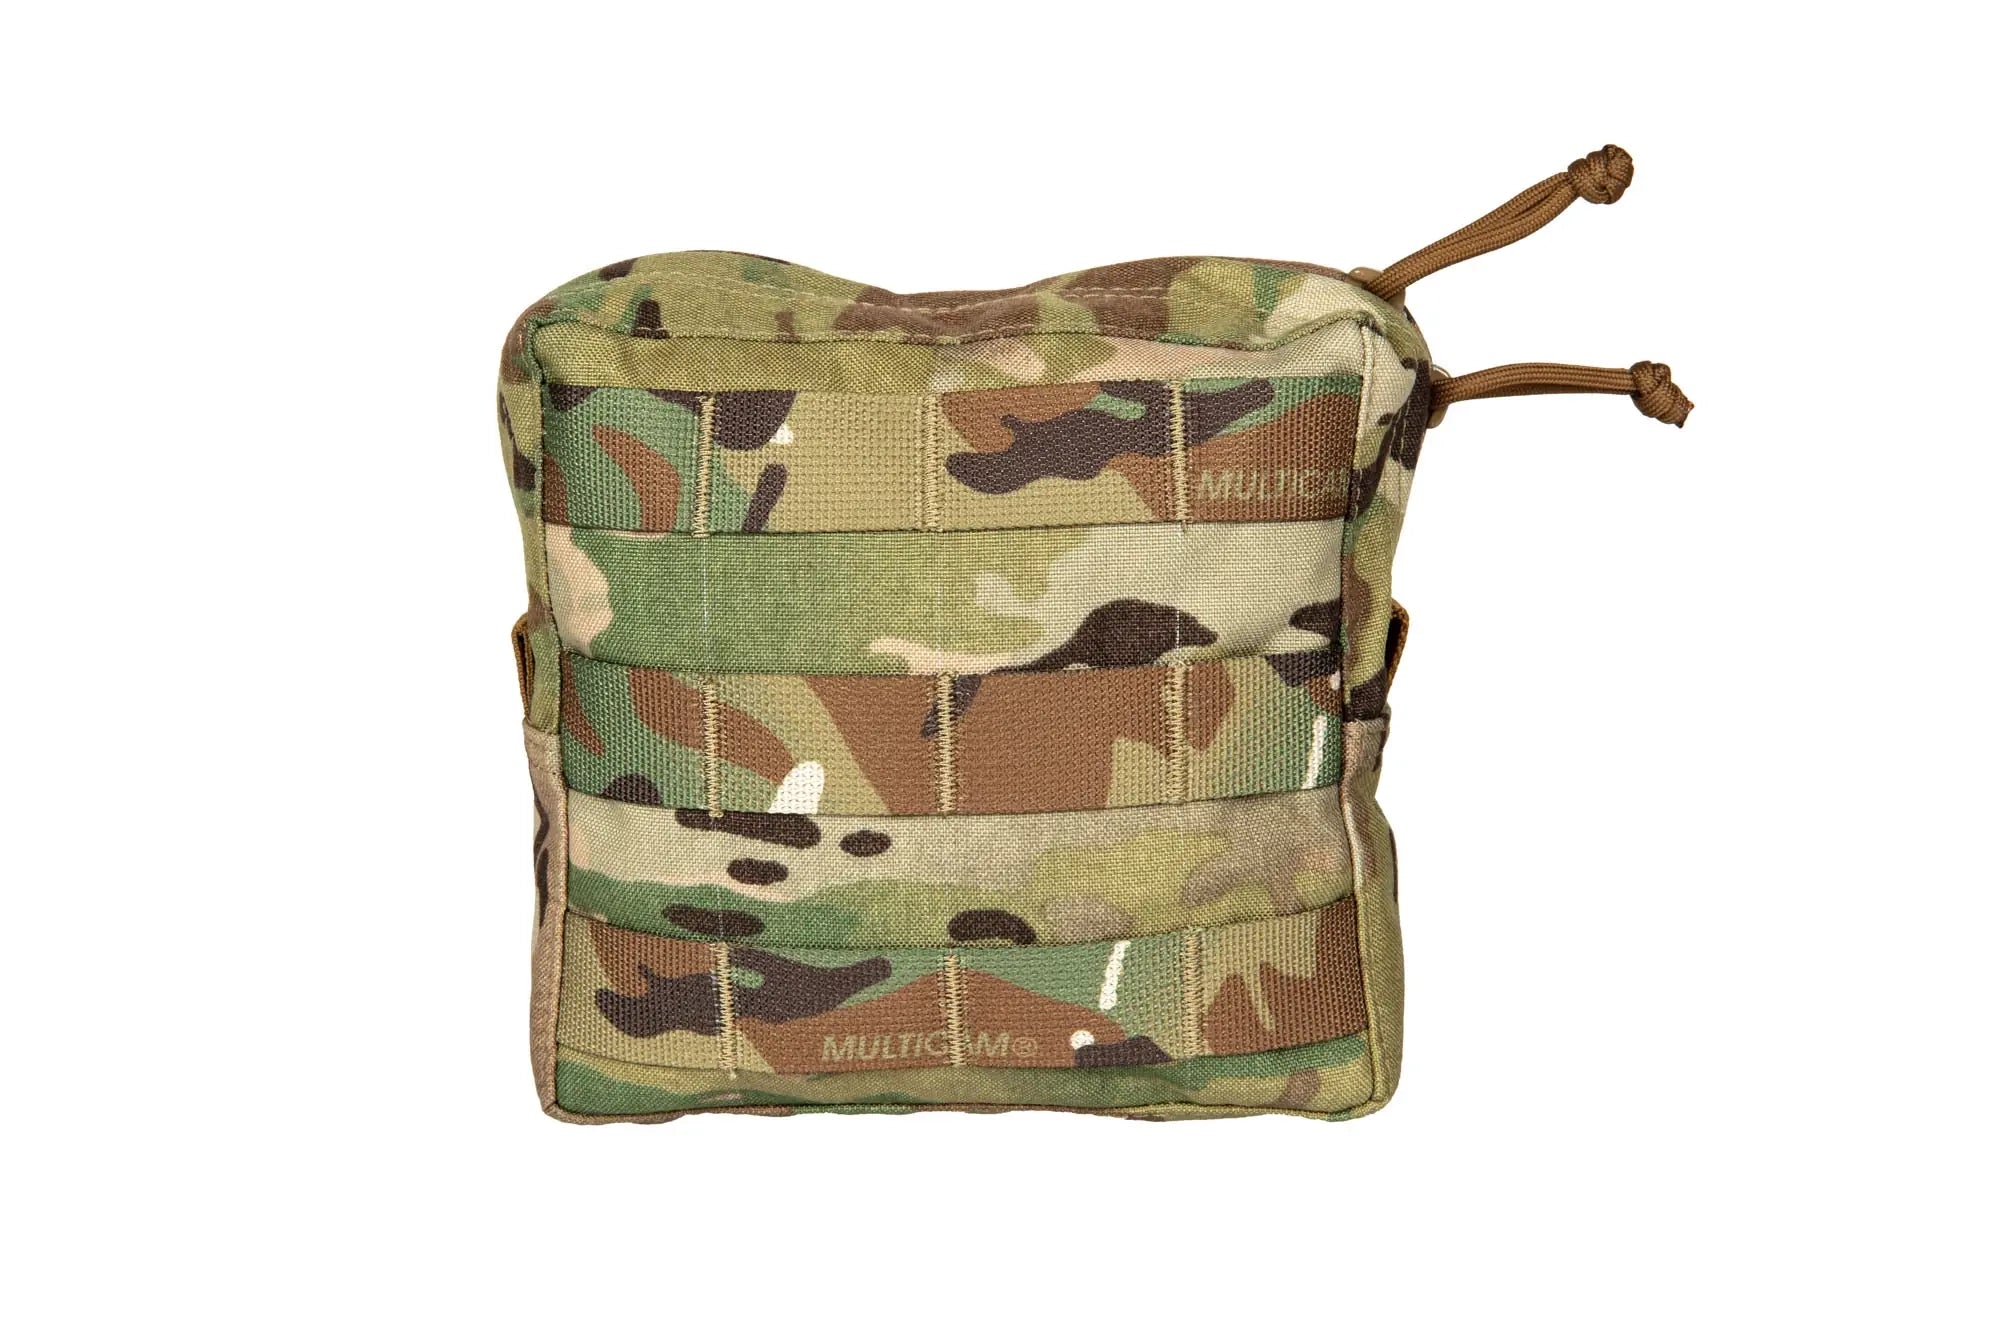 LV/119 Plate Carrier Coyote - Pew Tactical